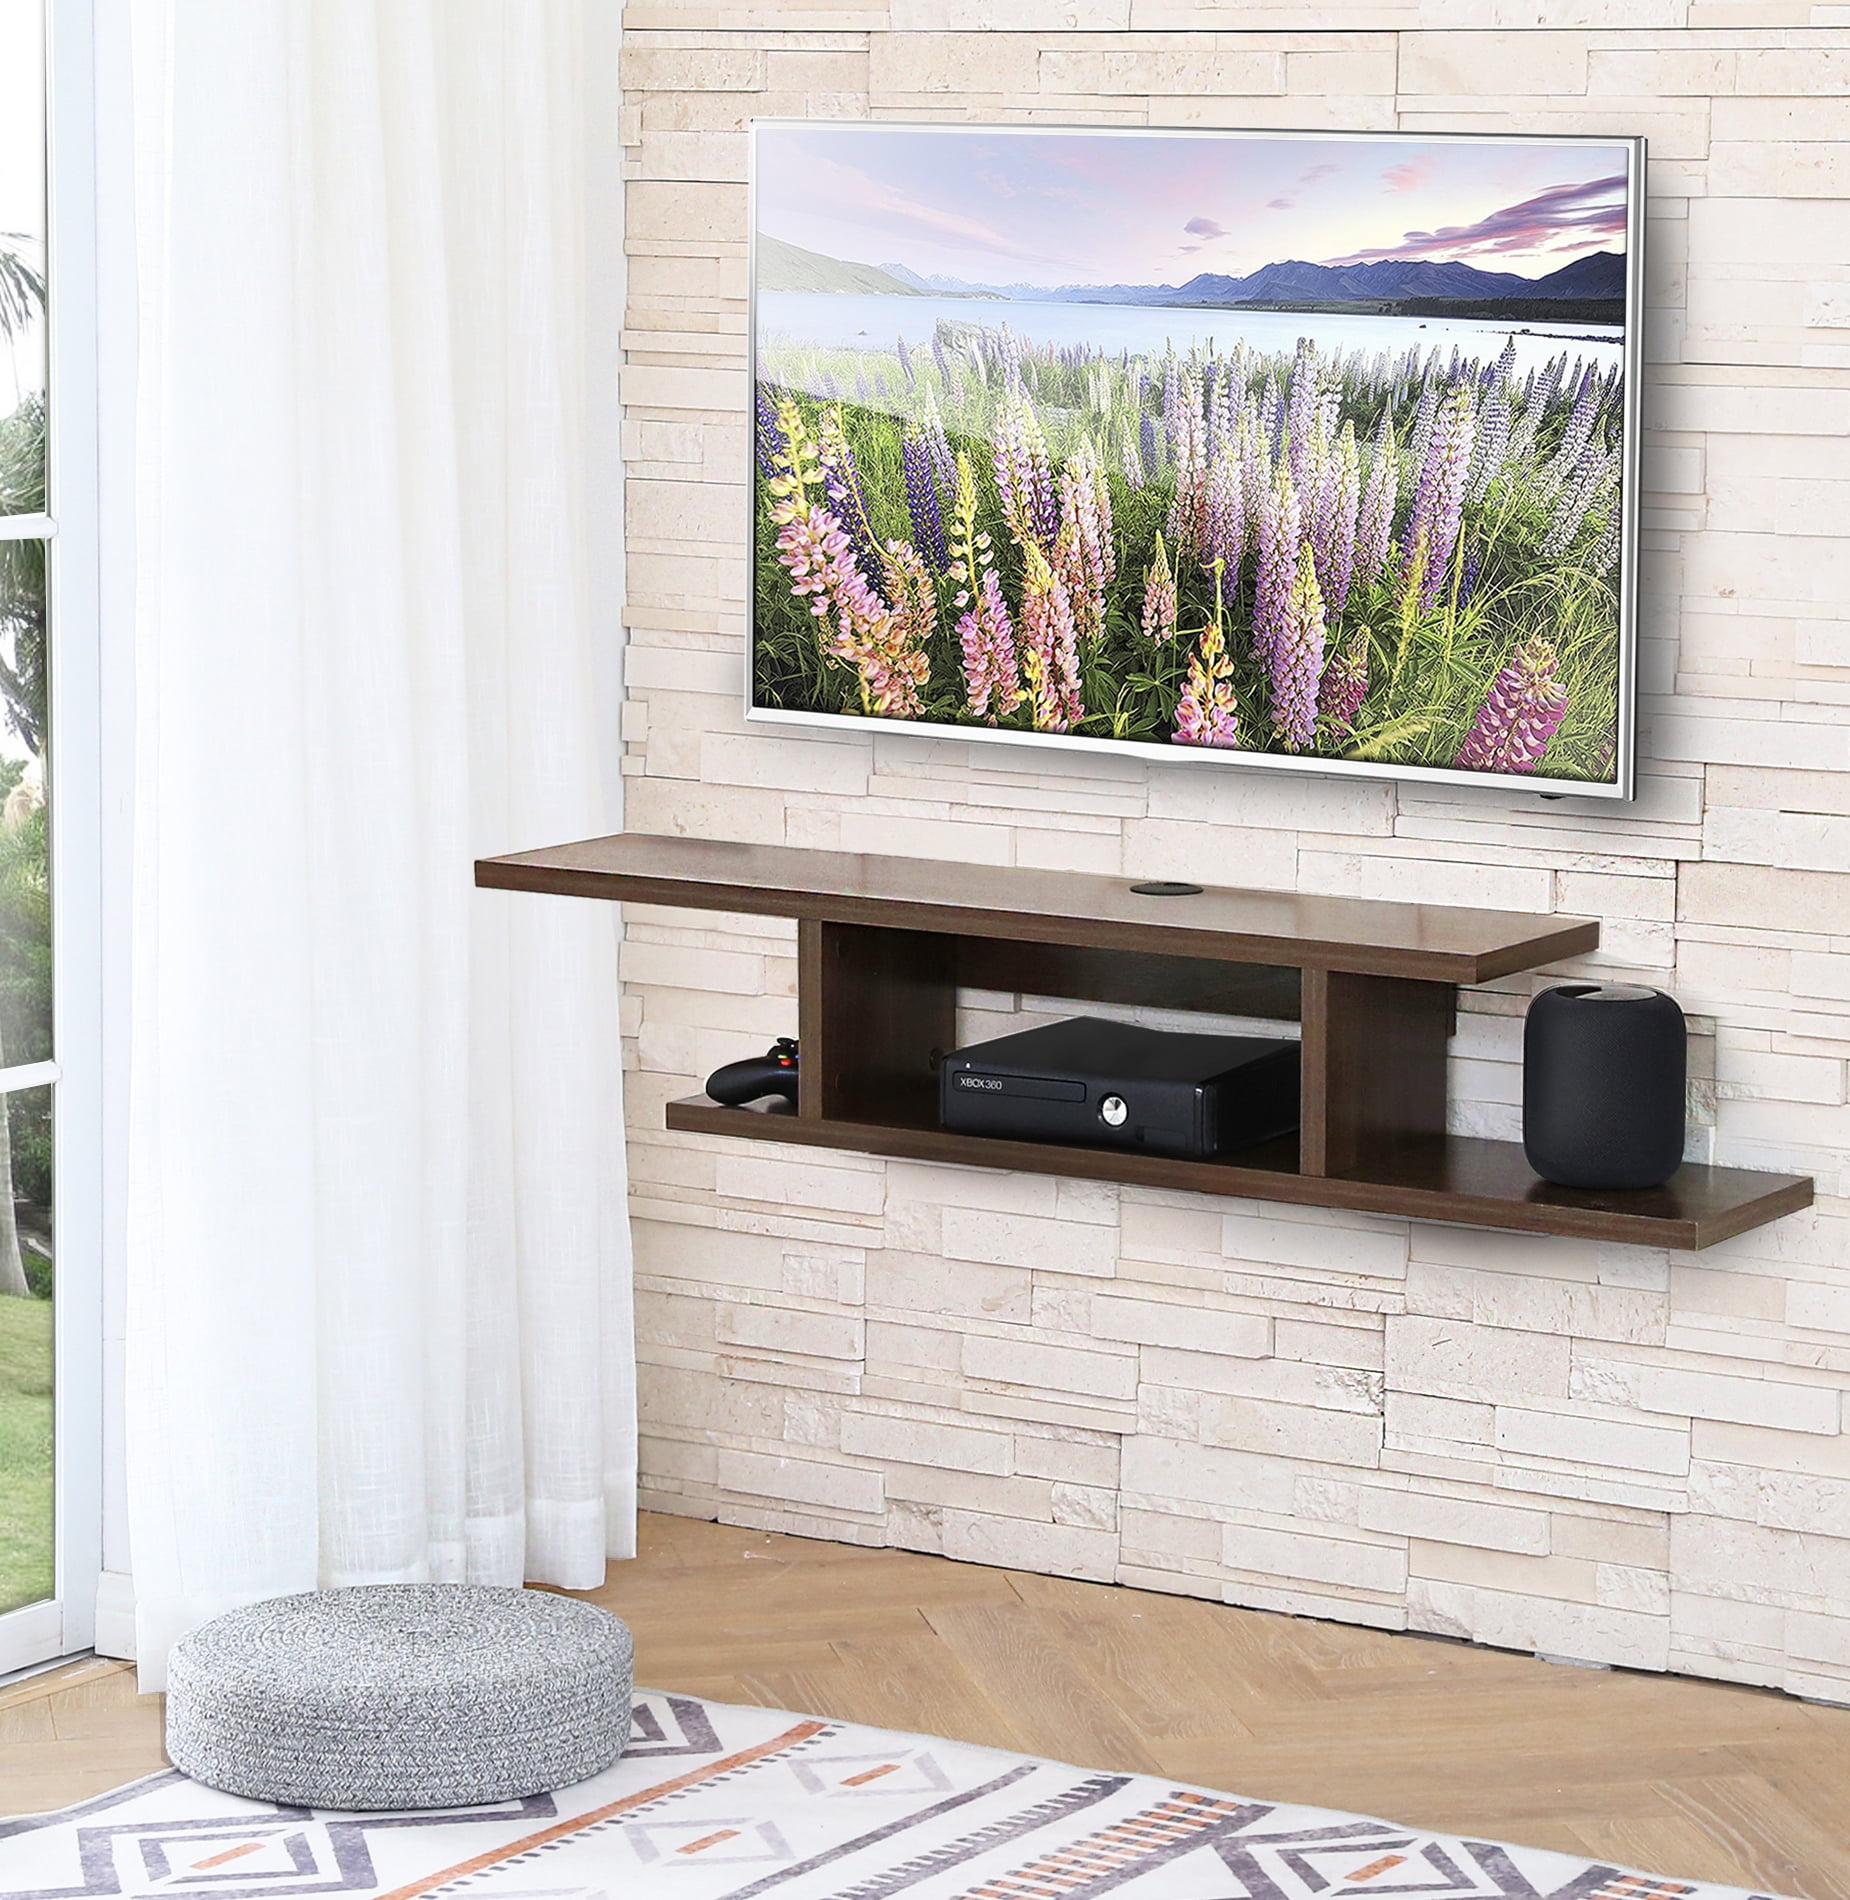 Wall Mounted Tv With Floating Shelves Floating Tv Unit Wood ...